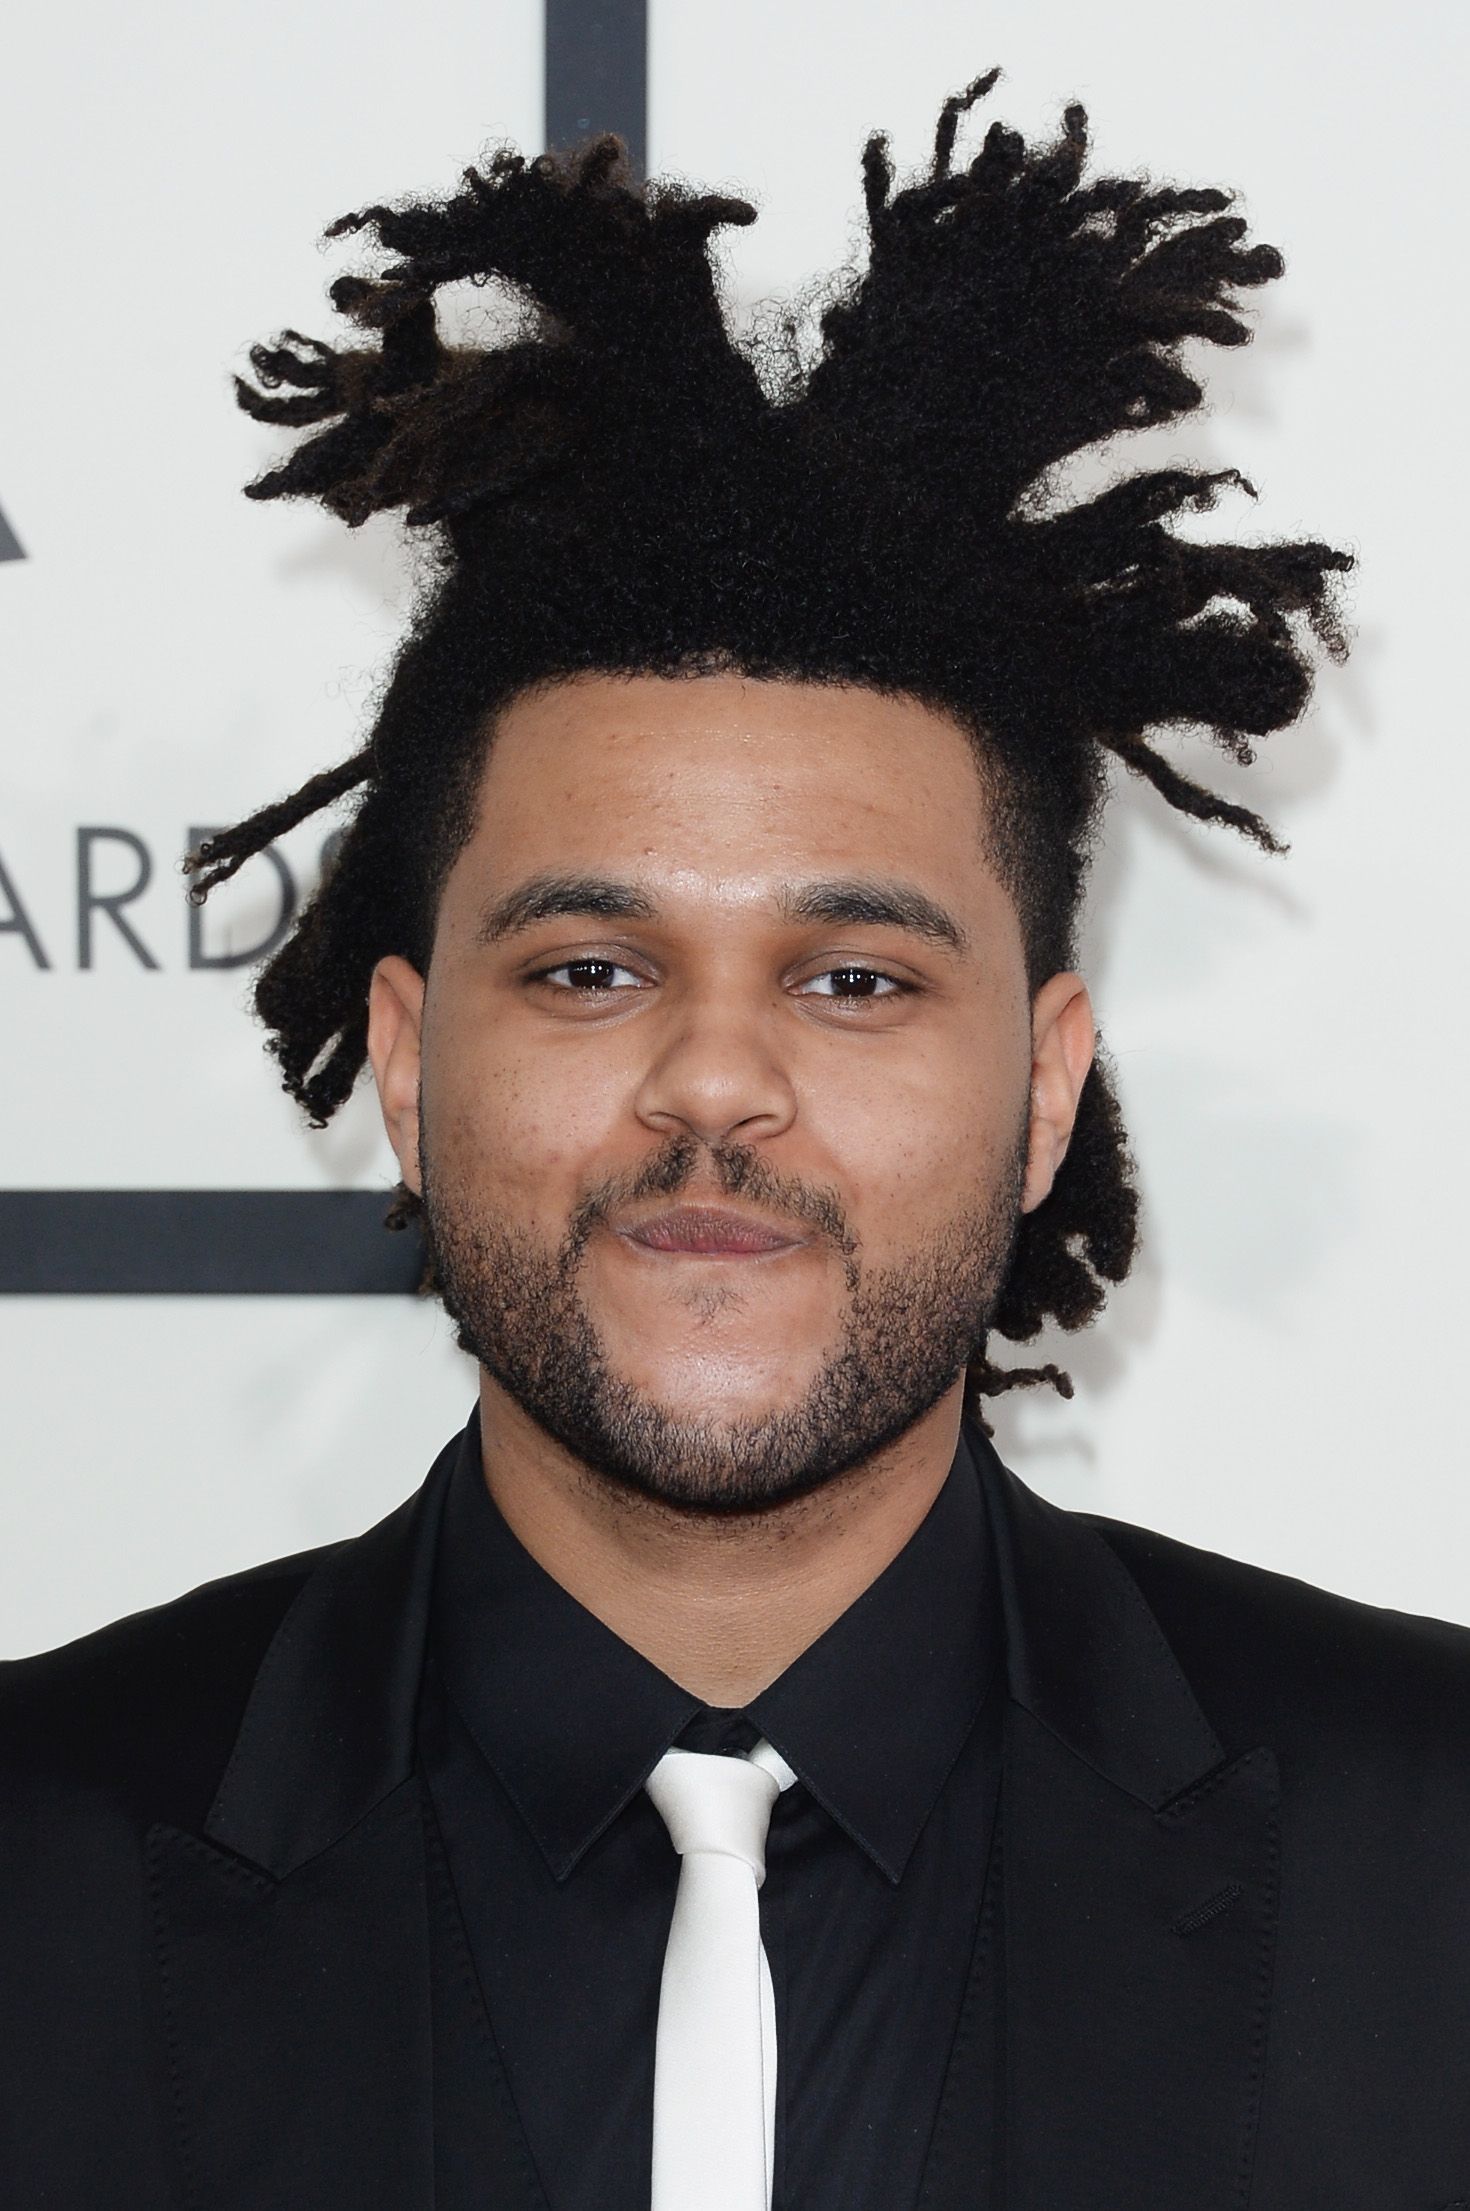 Abel Tesfaye of The Weeknd at the 56th GRAMMY Awards in January 2014 in Los Angeles | Source: Getty Images